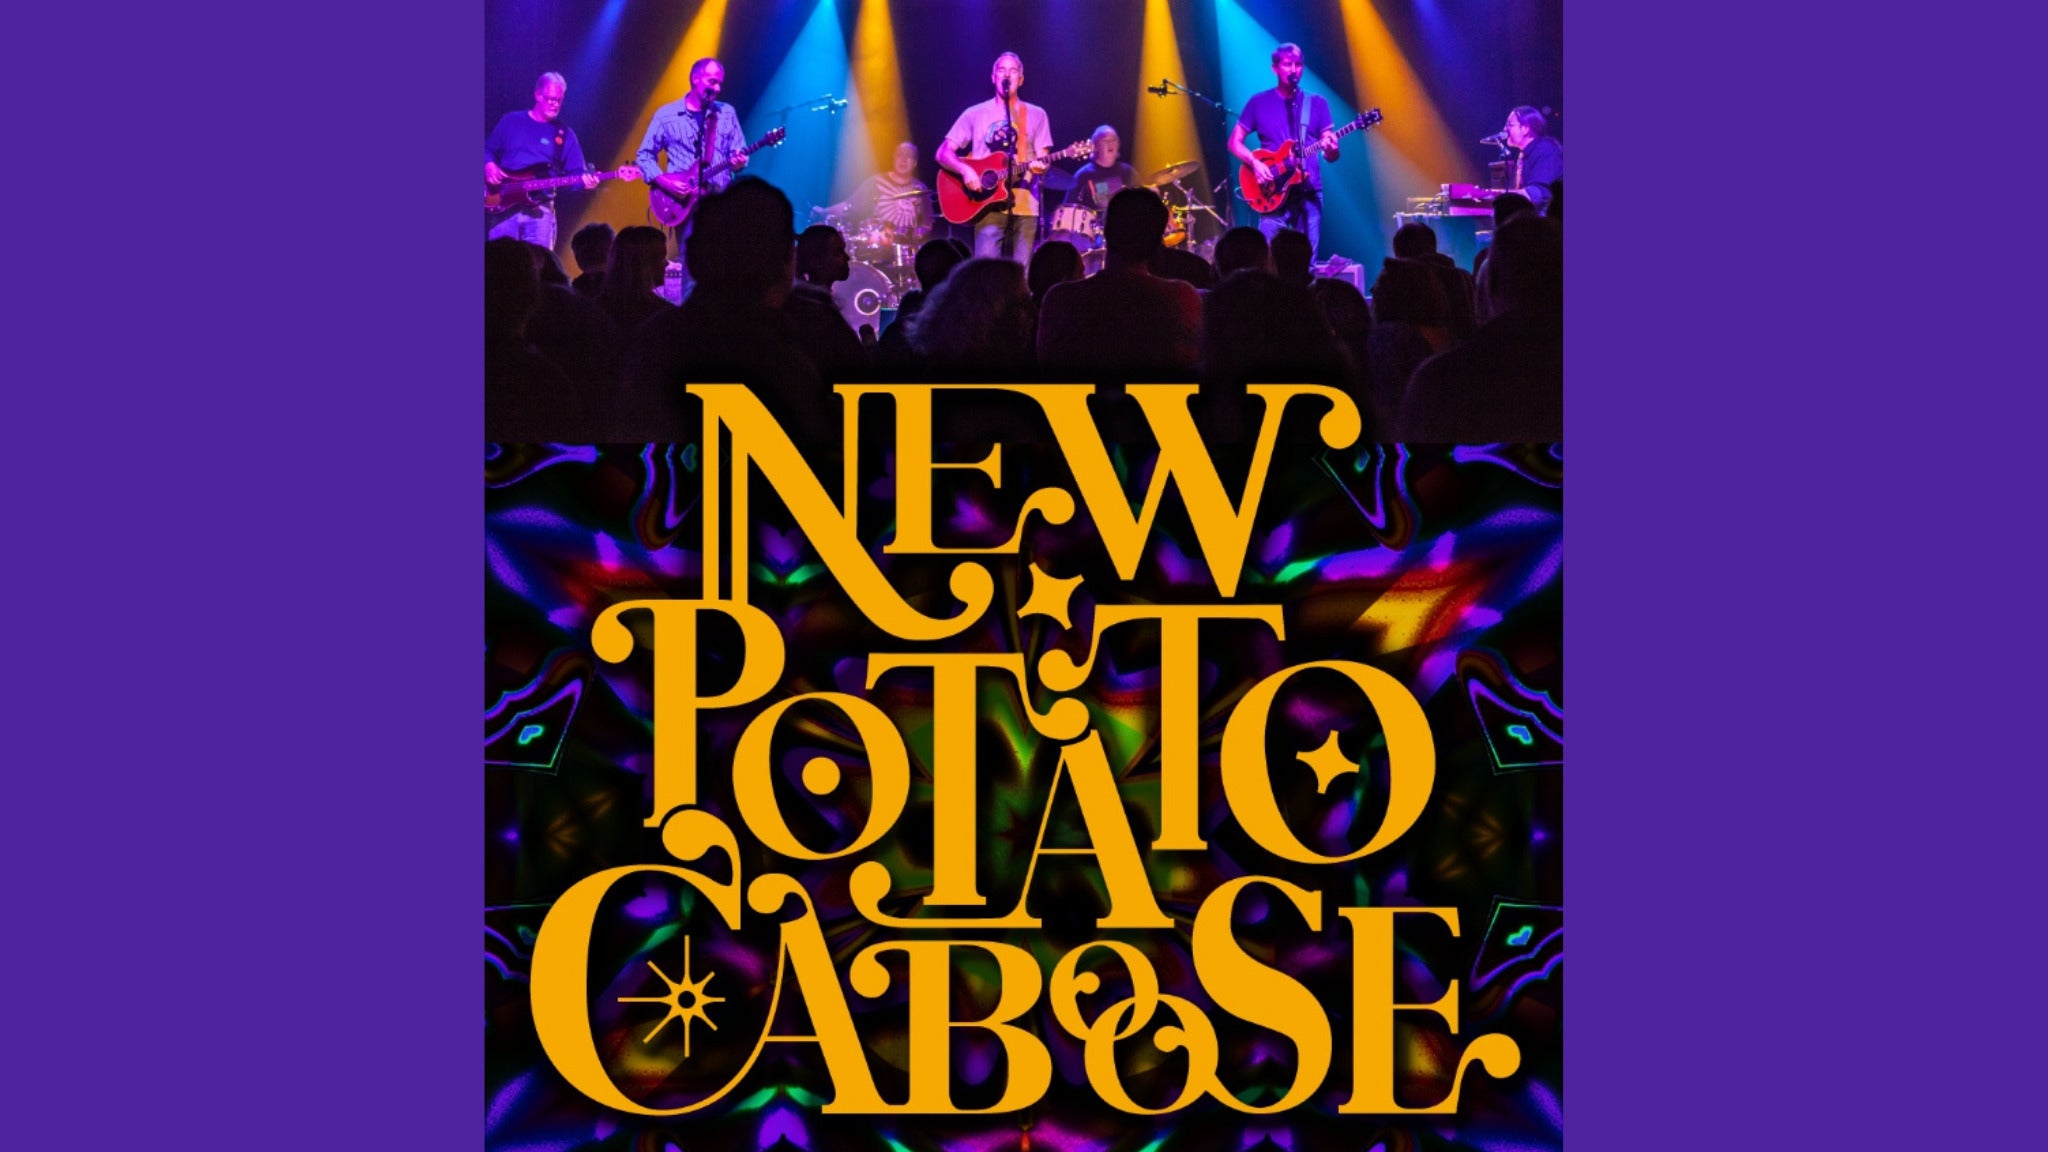 New Potato Caboose in Virginia Beach promo photo for Box Office Day Of Show presale offer code